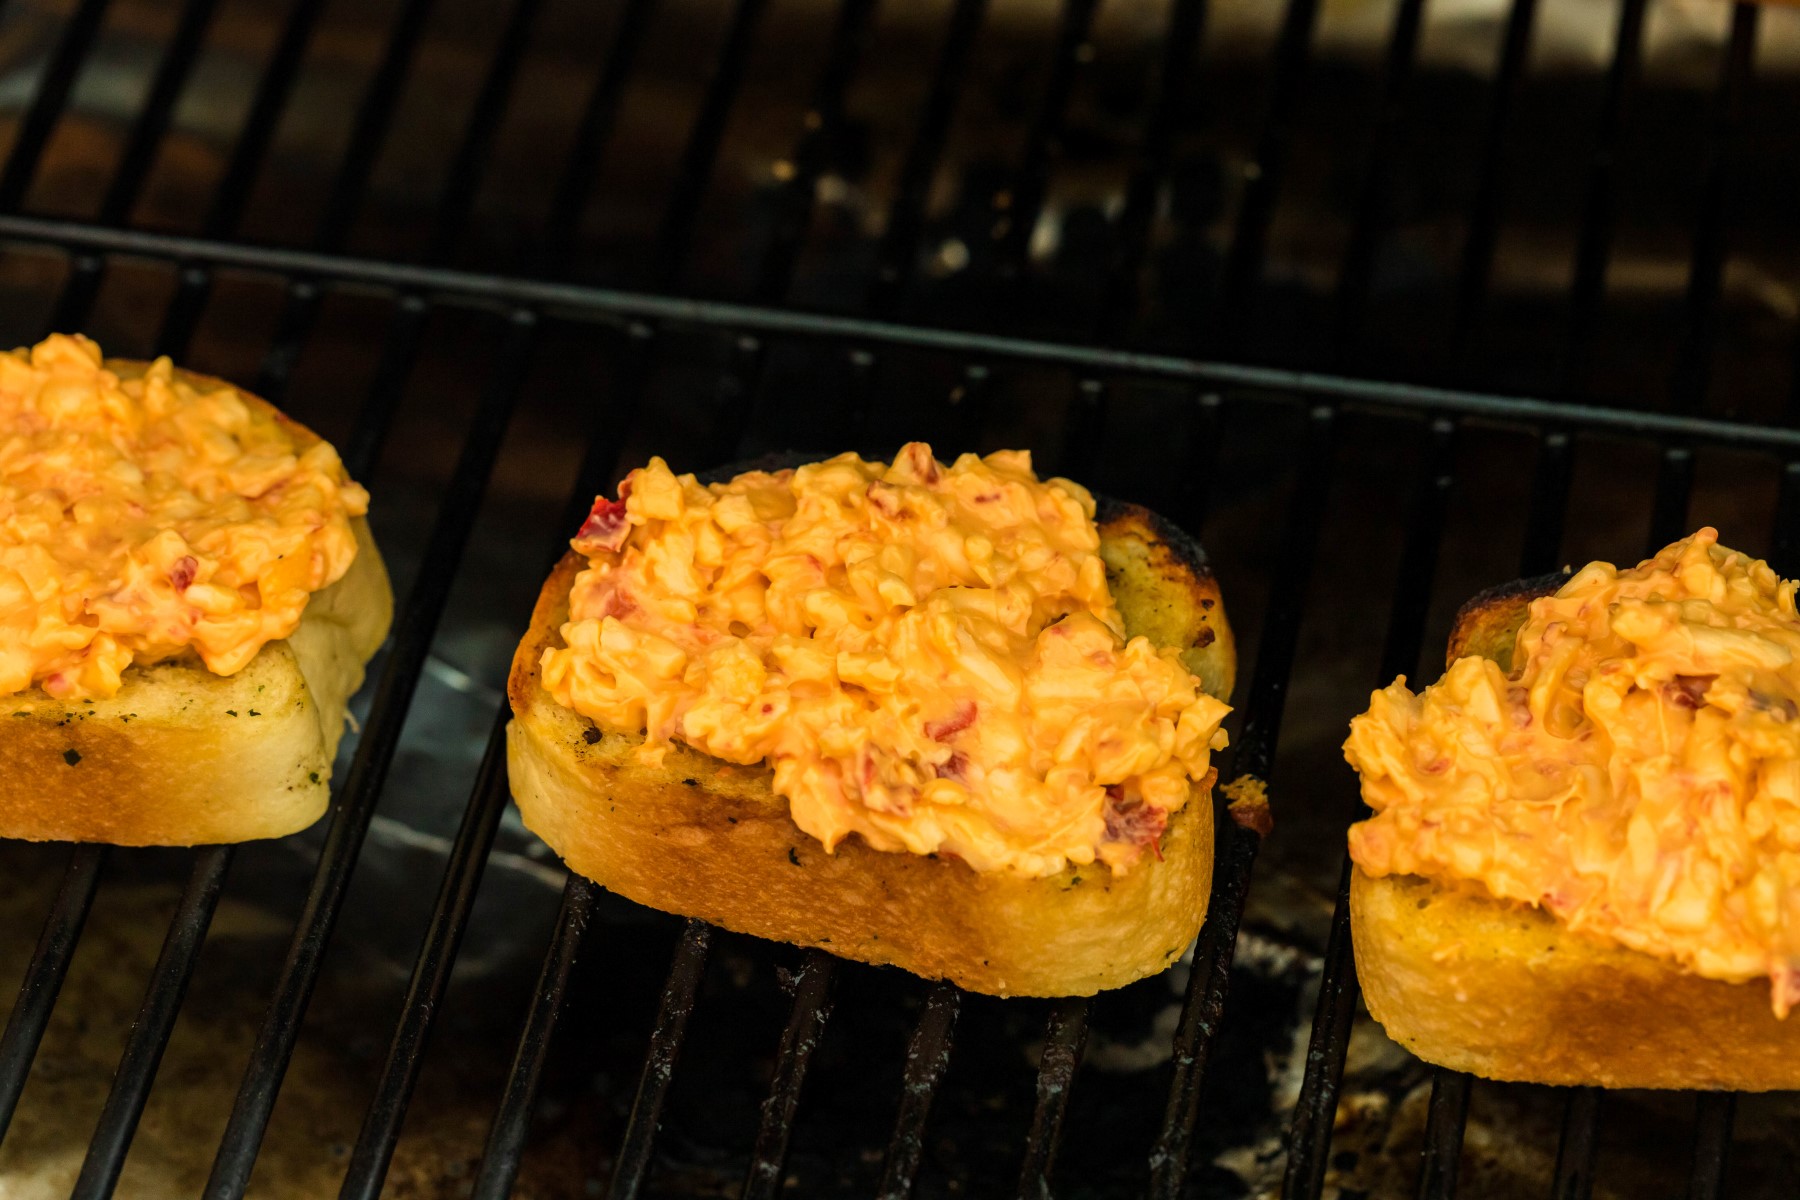 Pimento cheese spread over the Texas toast as it cooks on the grill.